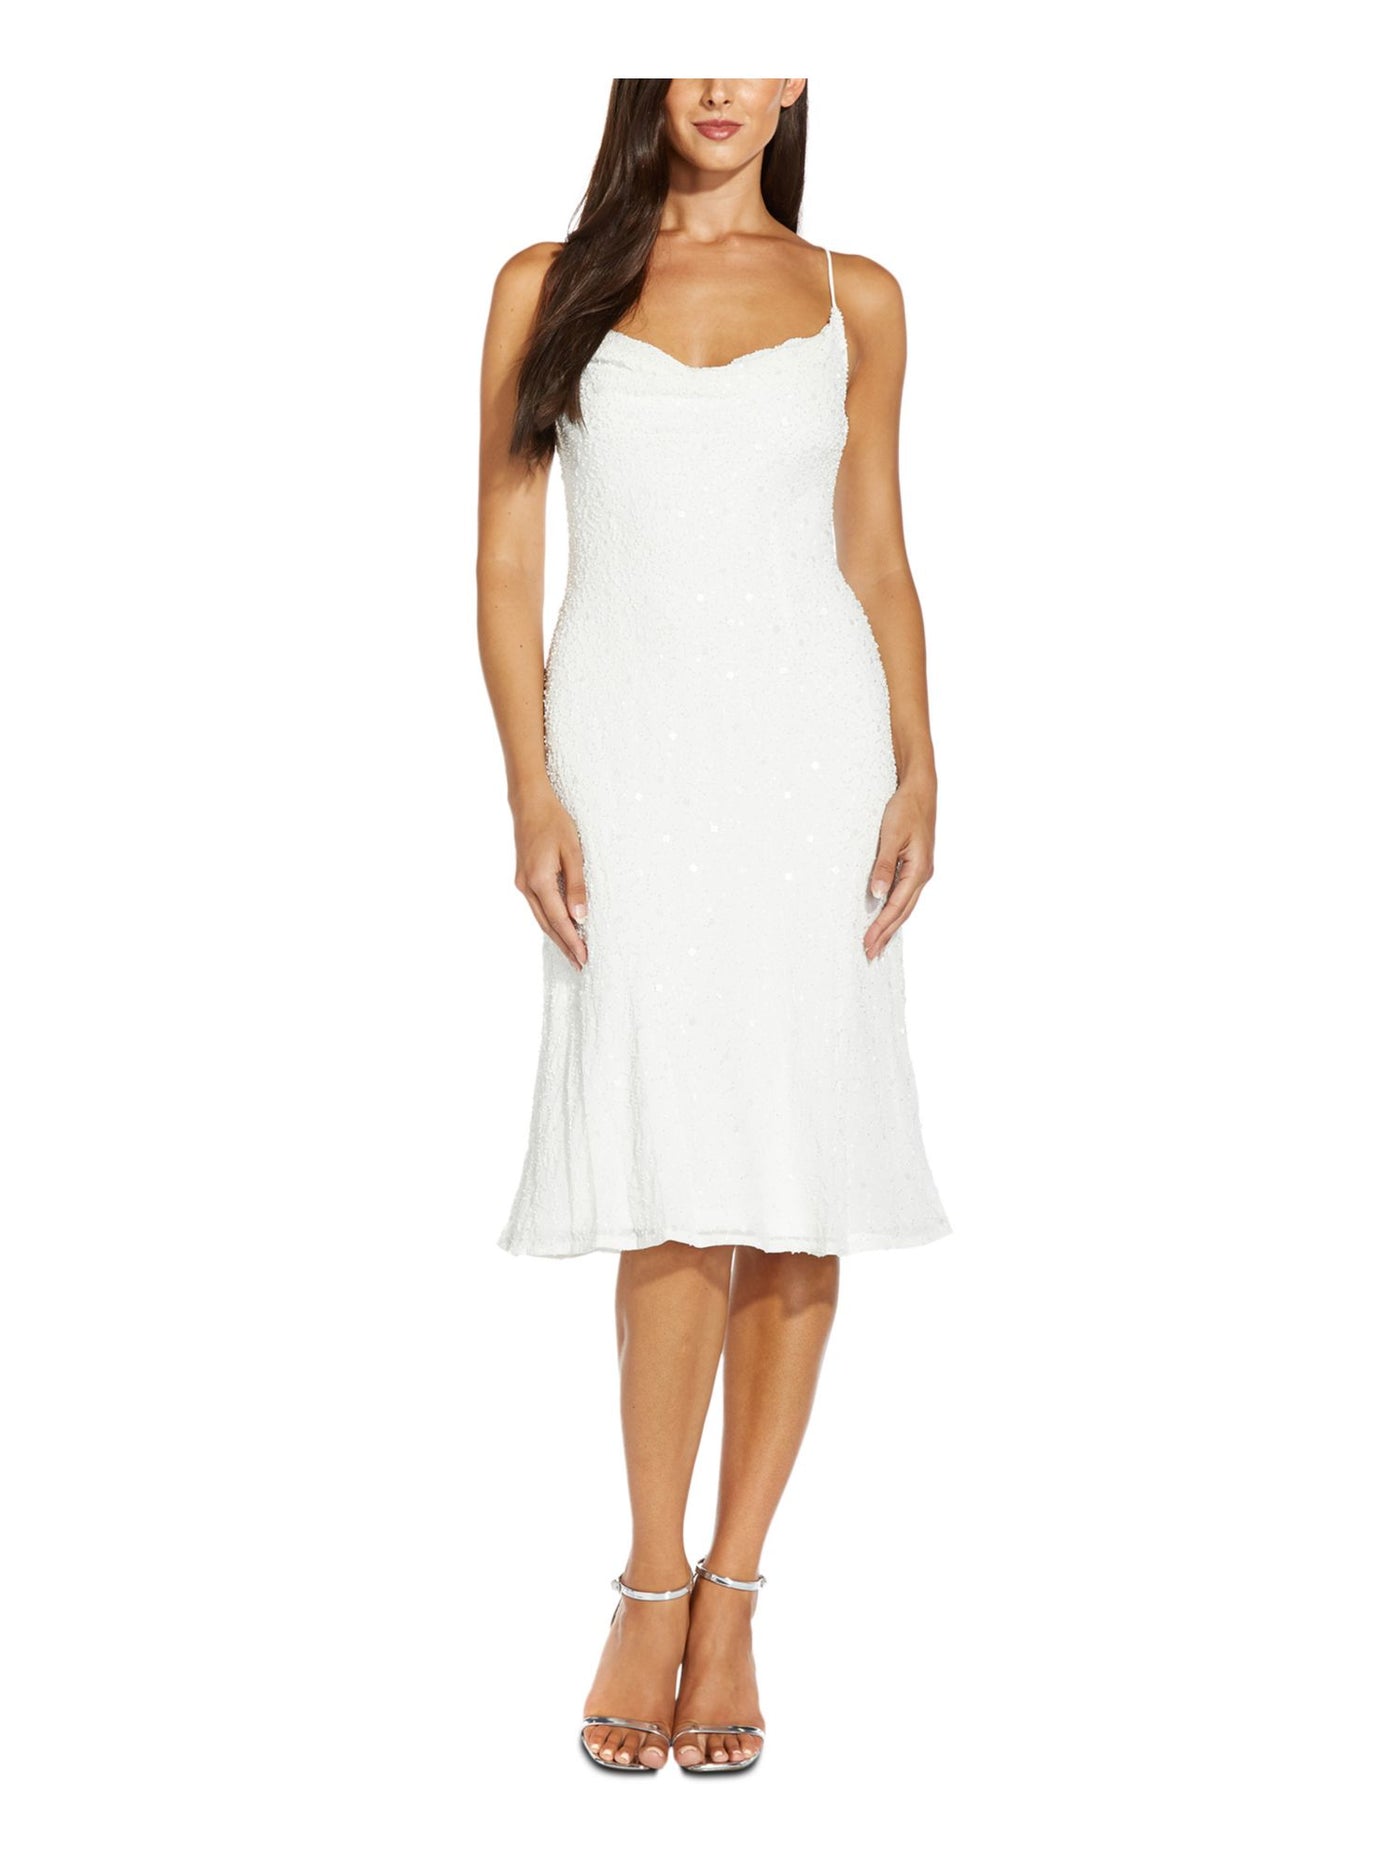 ADRIANNA PAPELL Womens White Beaded Zippered Spaghetti Strap Cowl Neck Knee Length Evening Fit + Flare Dress 4